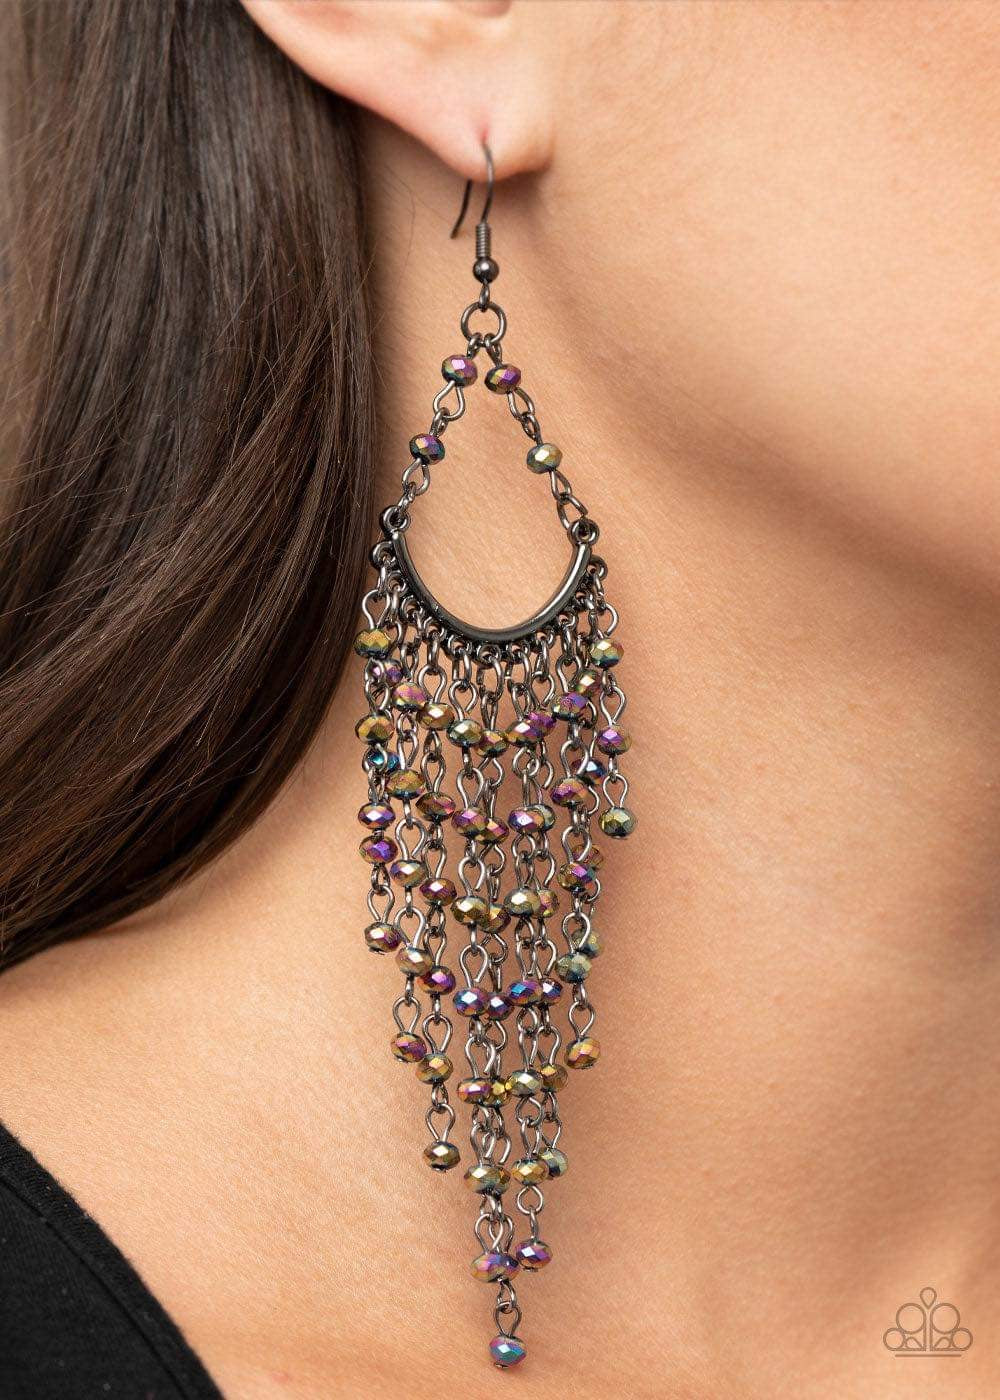 Metro Confetti Multi Earring - Paparazzi Accessories  Oil spill rhinestone beaded tassels cascade from the bottom of a bowing gunmetal bar, creating an ethereal tapered fringe. Earring attaches to a standard fishhook fitting.  Sold as one pair of earrings. This Fan Favorite is back in the spotlight at the request of our 2021 Life of the Party member with Black Diamond Access, Heather L.